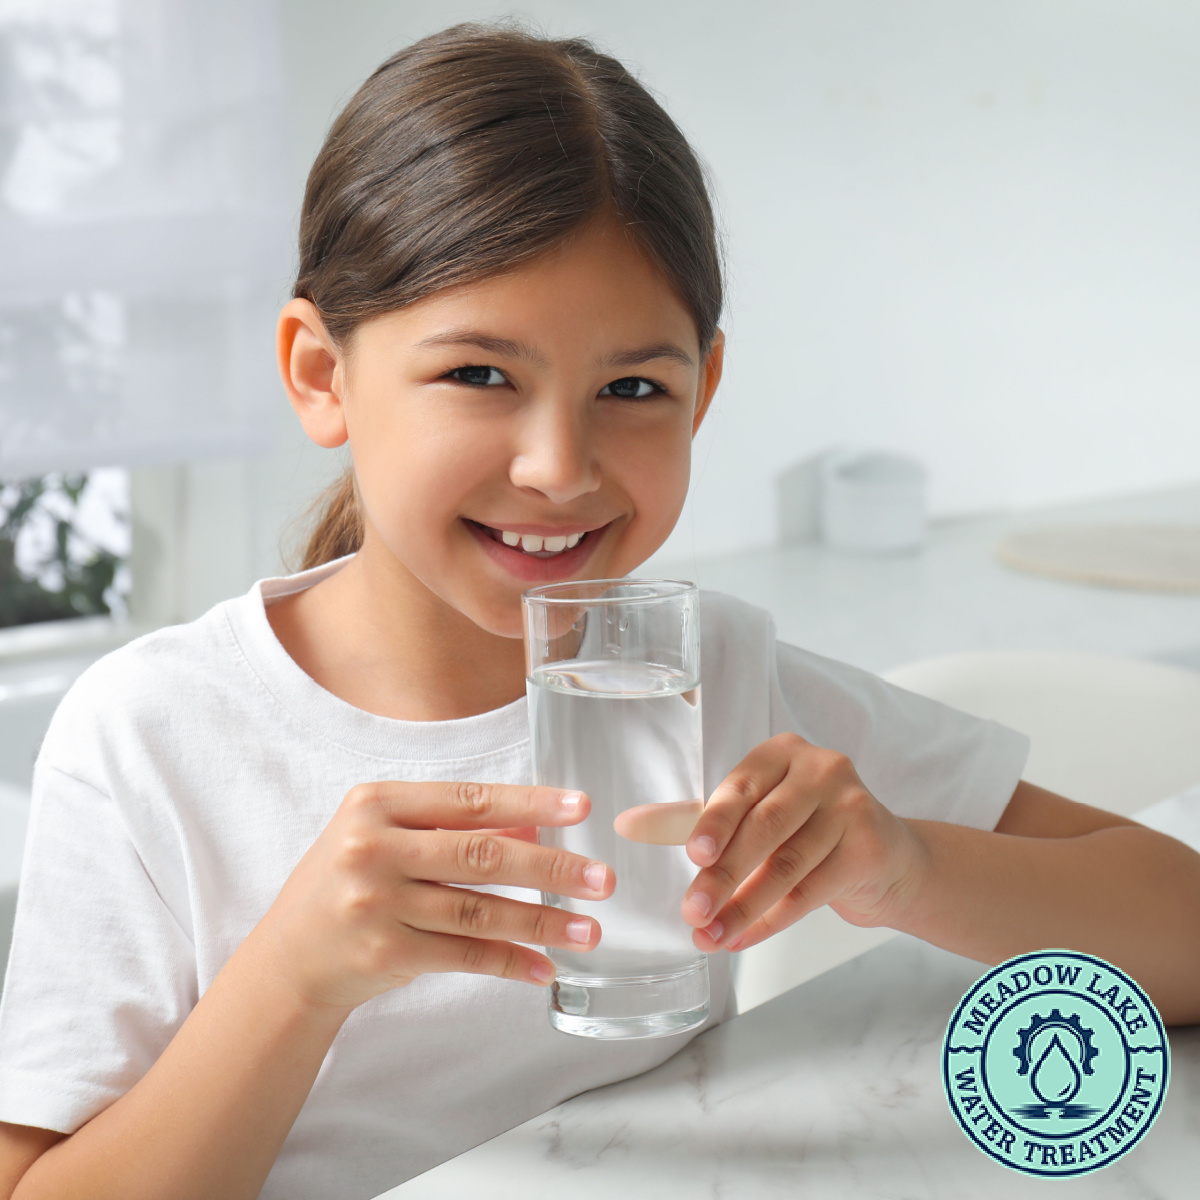 Discover Clean and Pure Water with Meadow Lake Water Treatment in Lake Stevens!